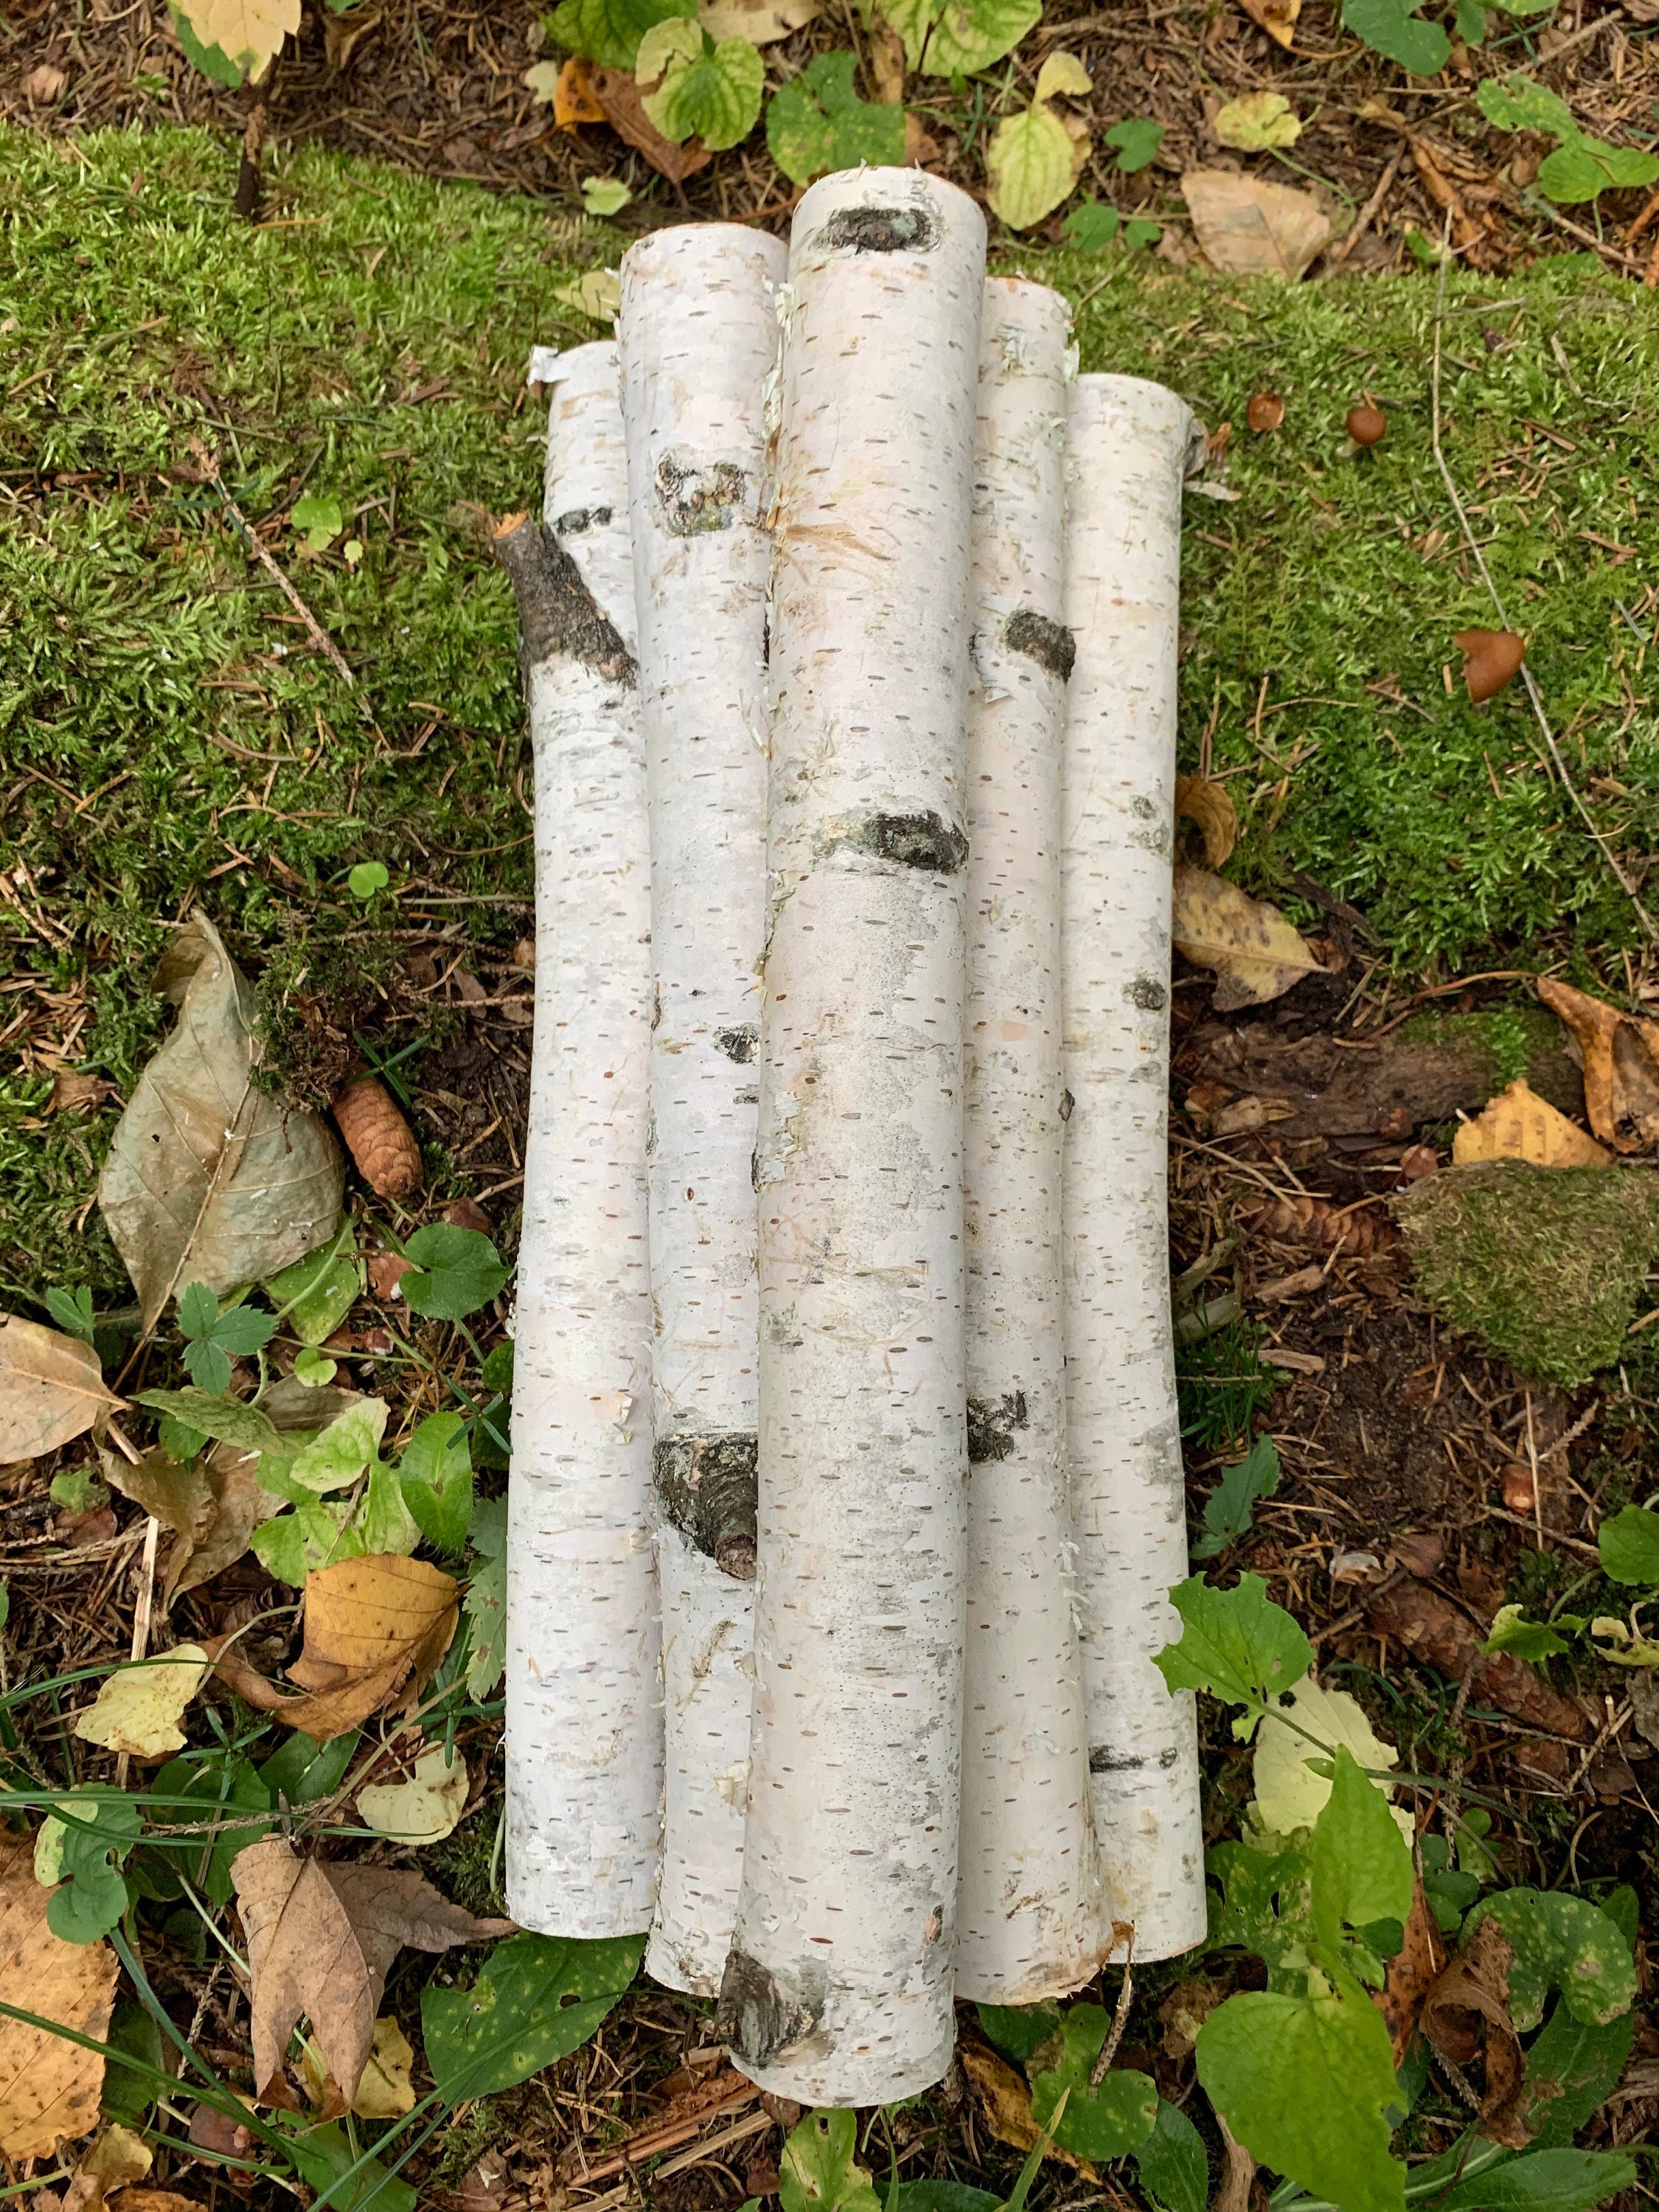 White Birch Branches, 6 count, 12 inches in length, 1 - 1 3/4 inch diameters